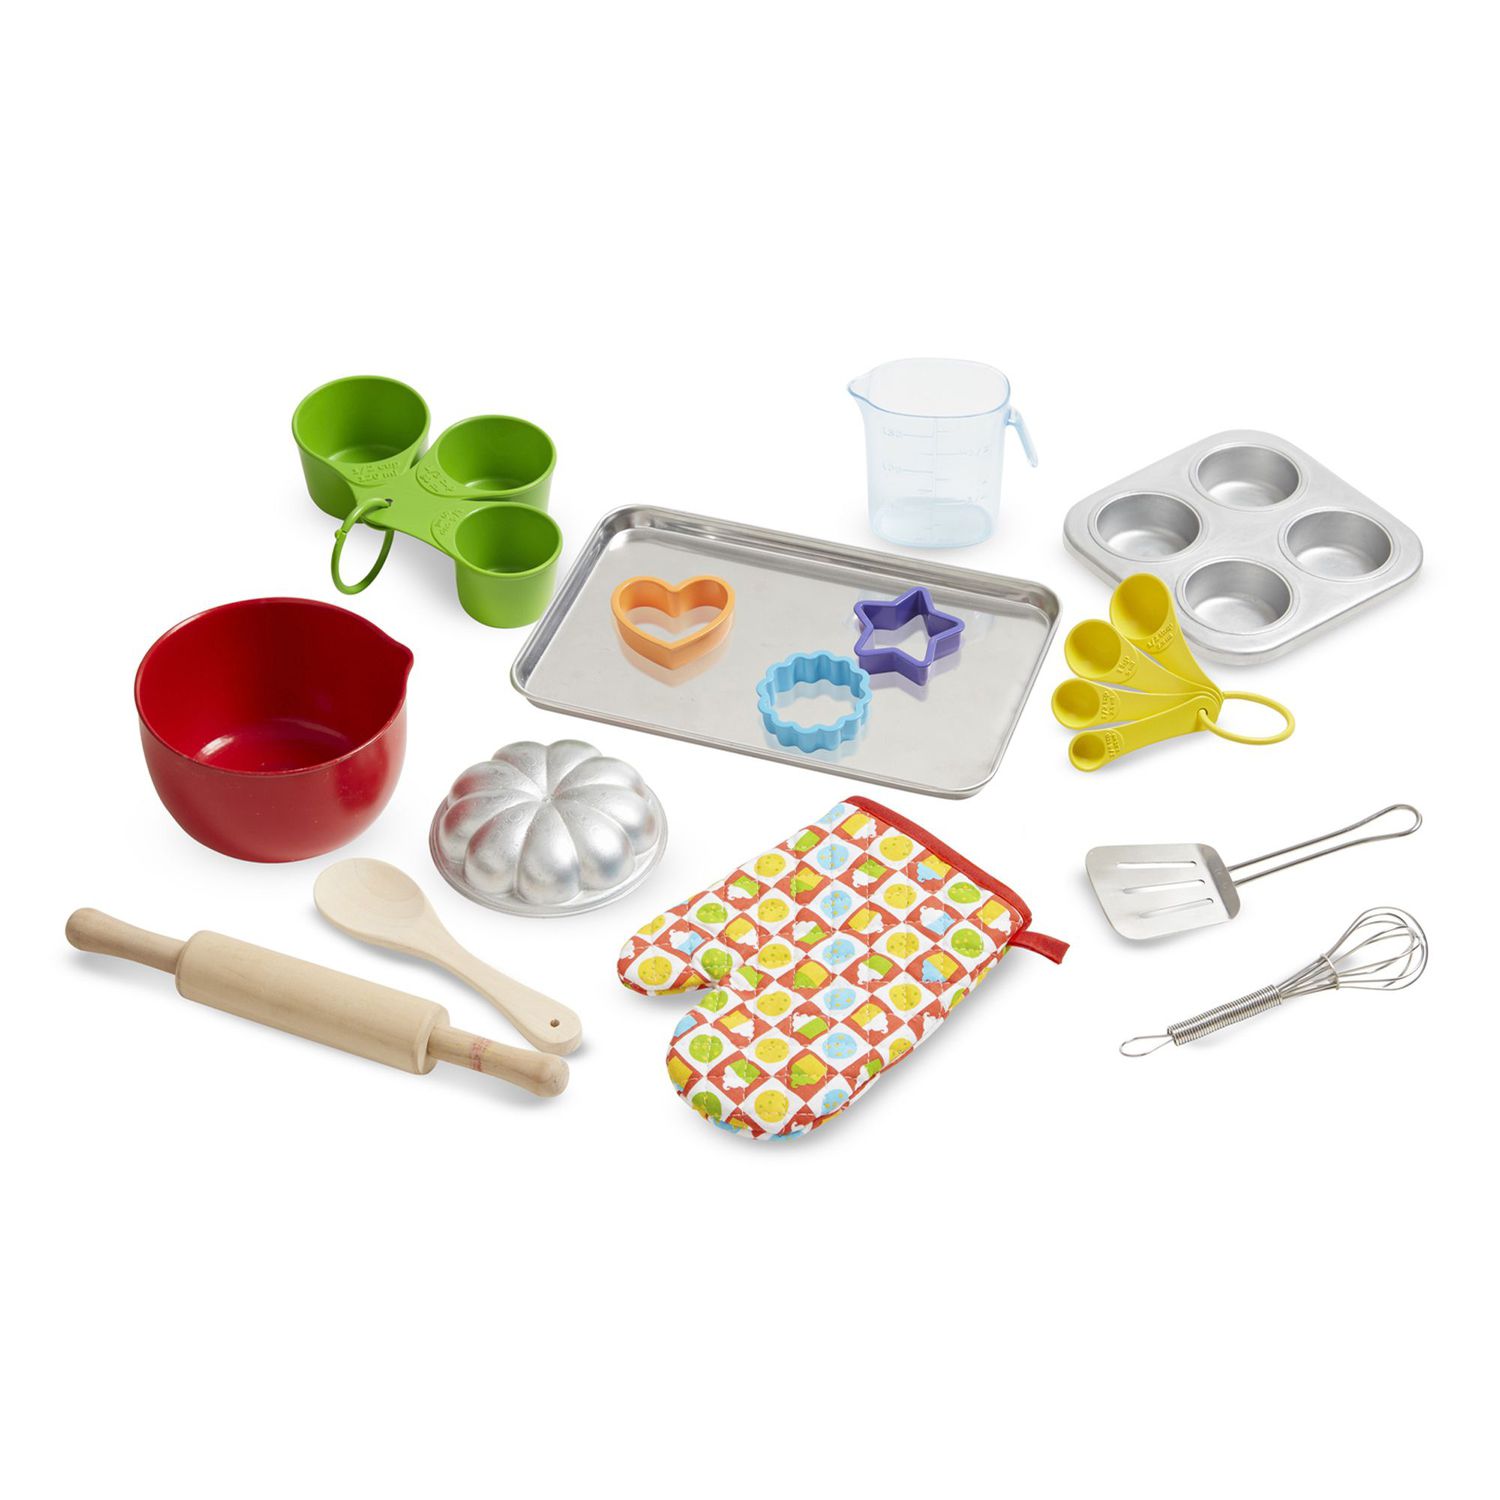 Easy-Bake Oven in Cooking & Baking Toys 